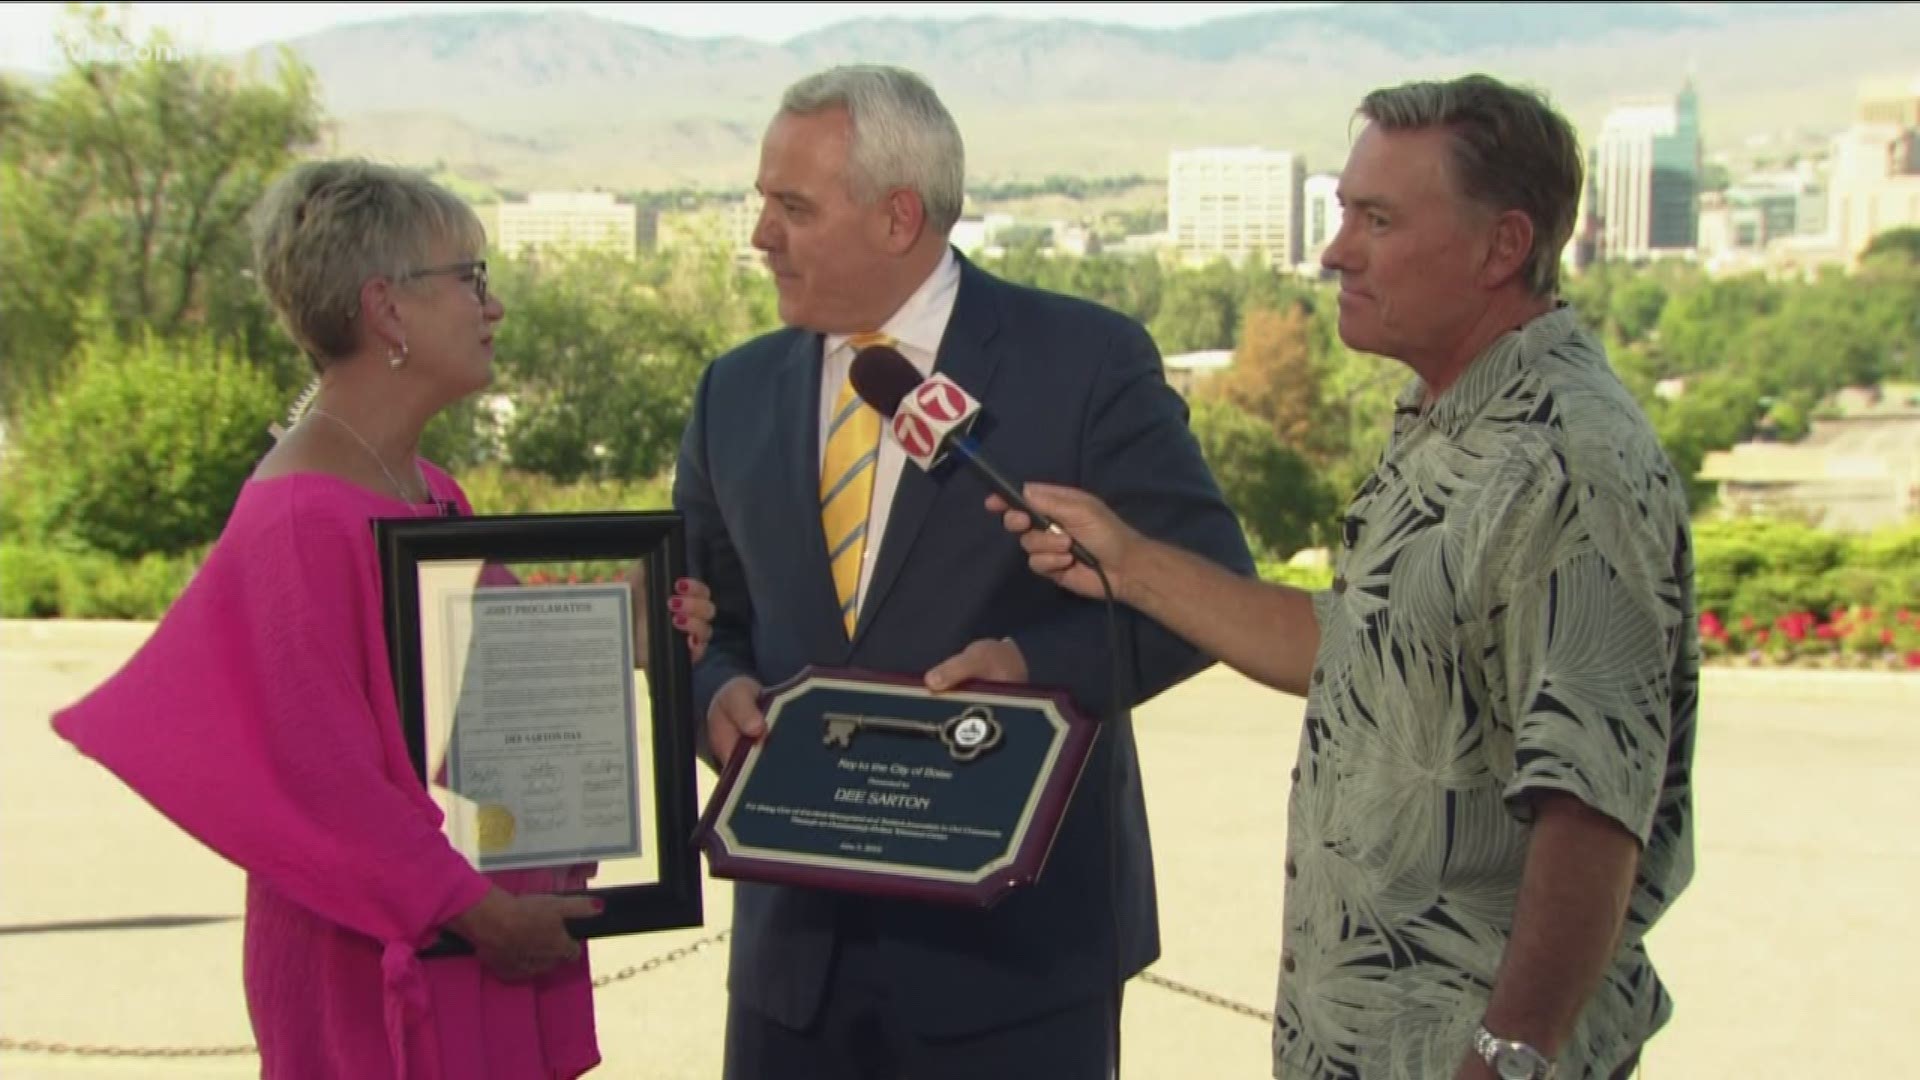 Boise Mayor Dave Bieter presented Dee with the key to the city.